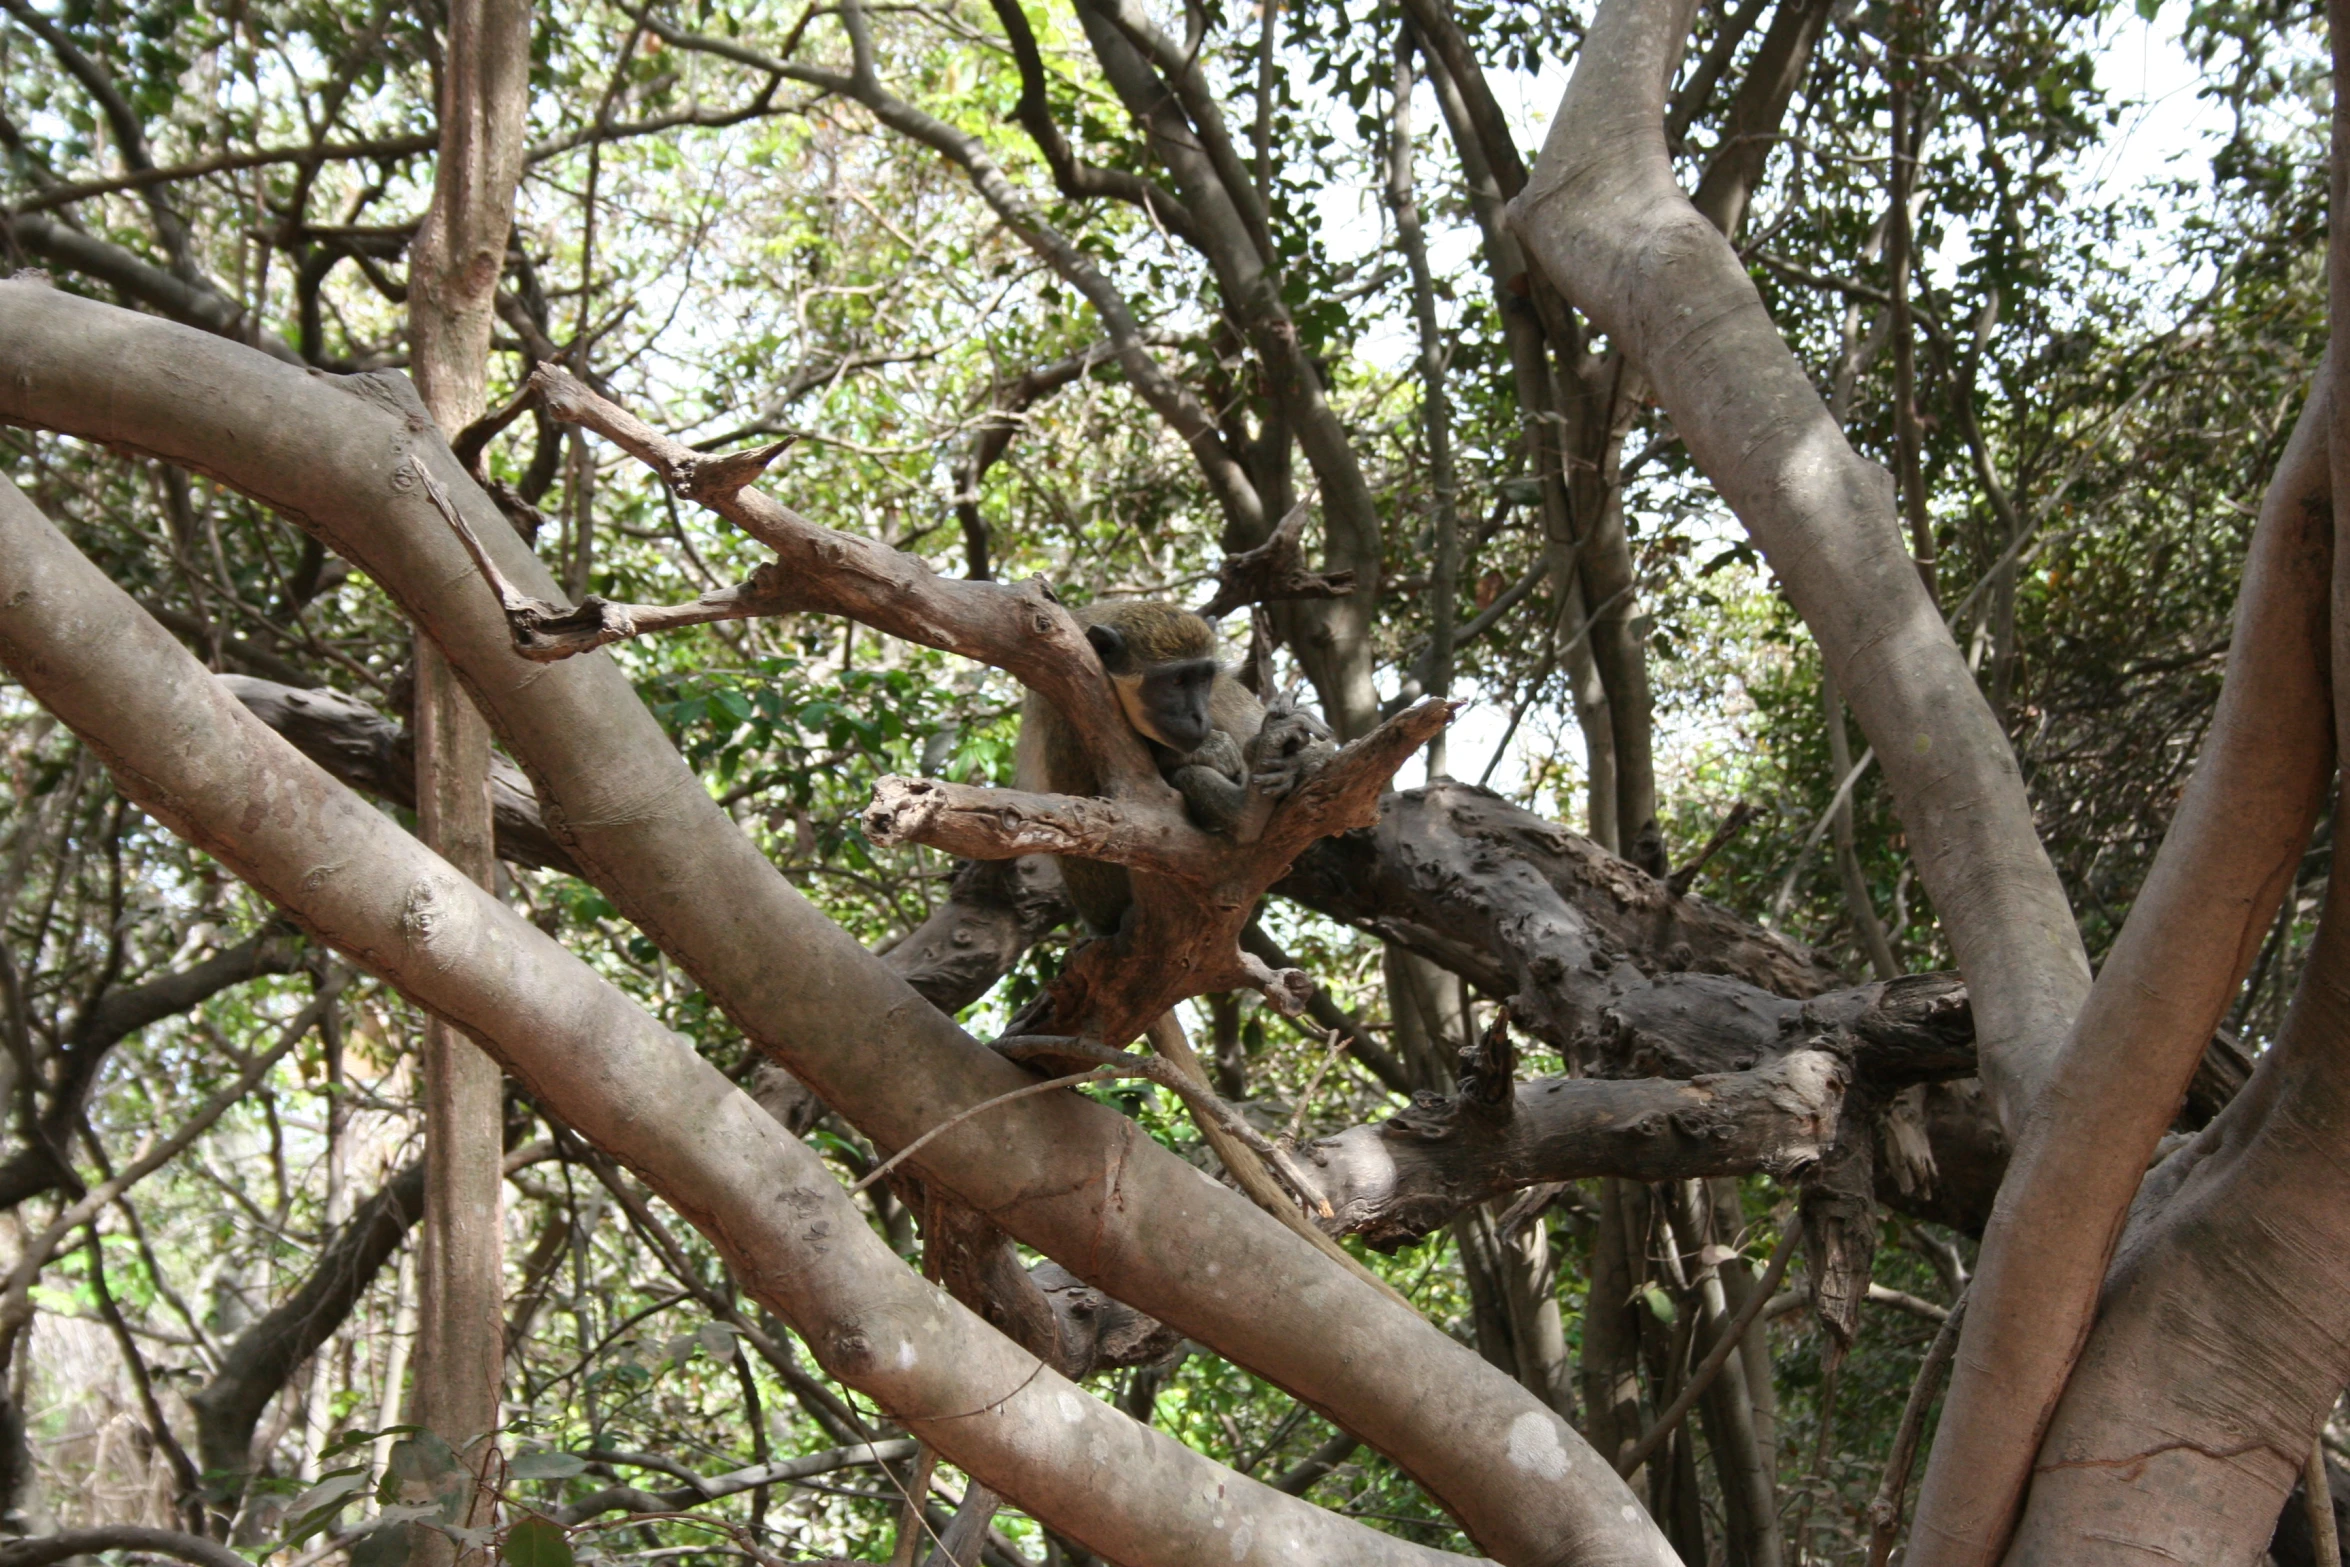 an image of a squirrel sitting on the nches of a tree